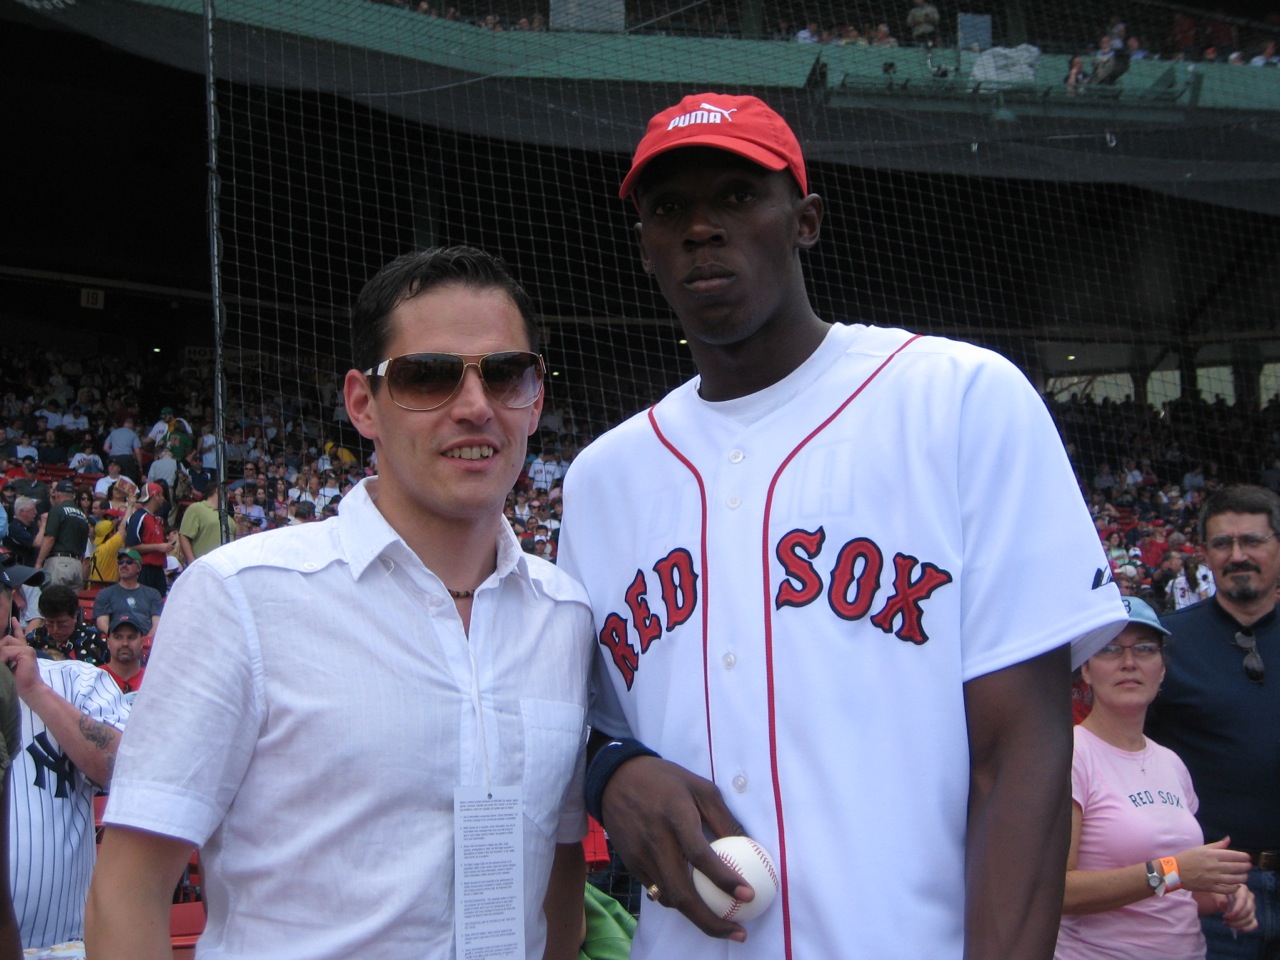 Ready to throw out the first pitch at Fenway Park